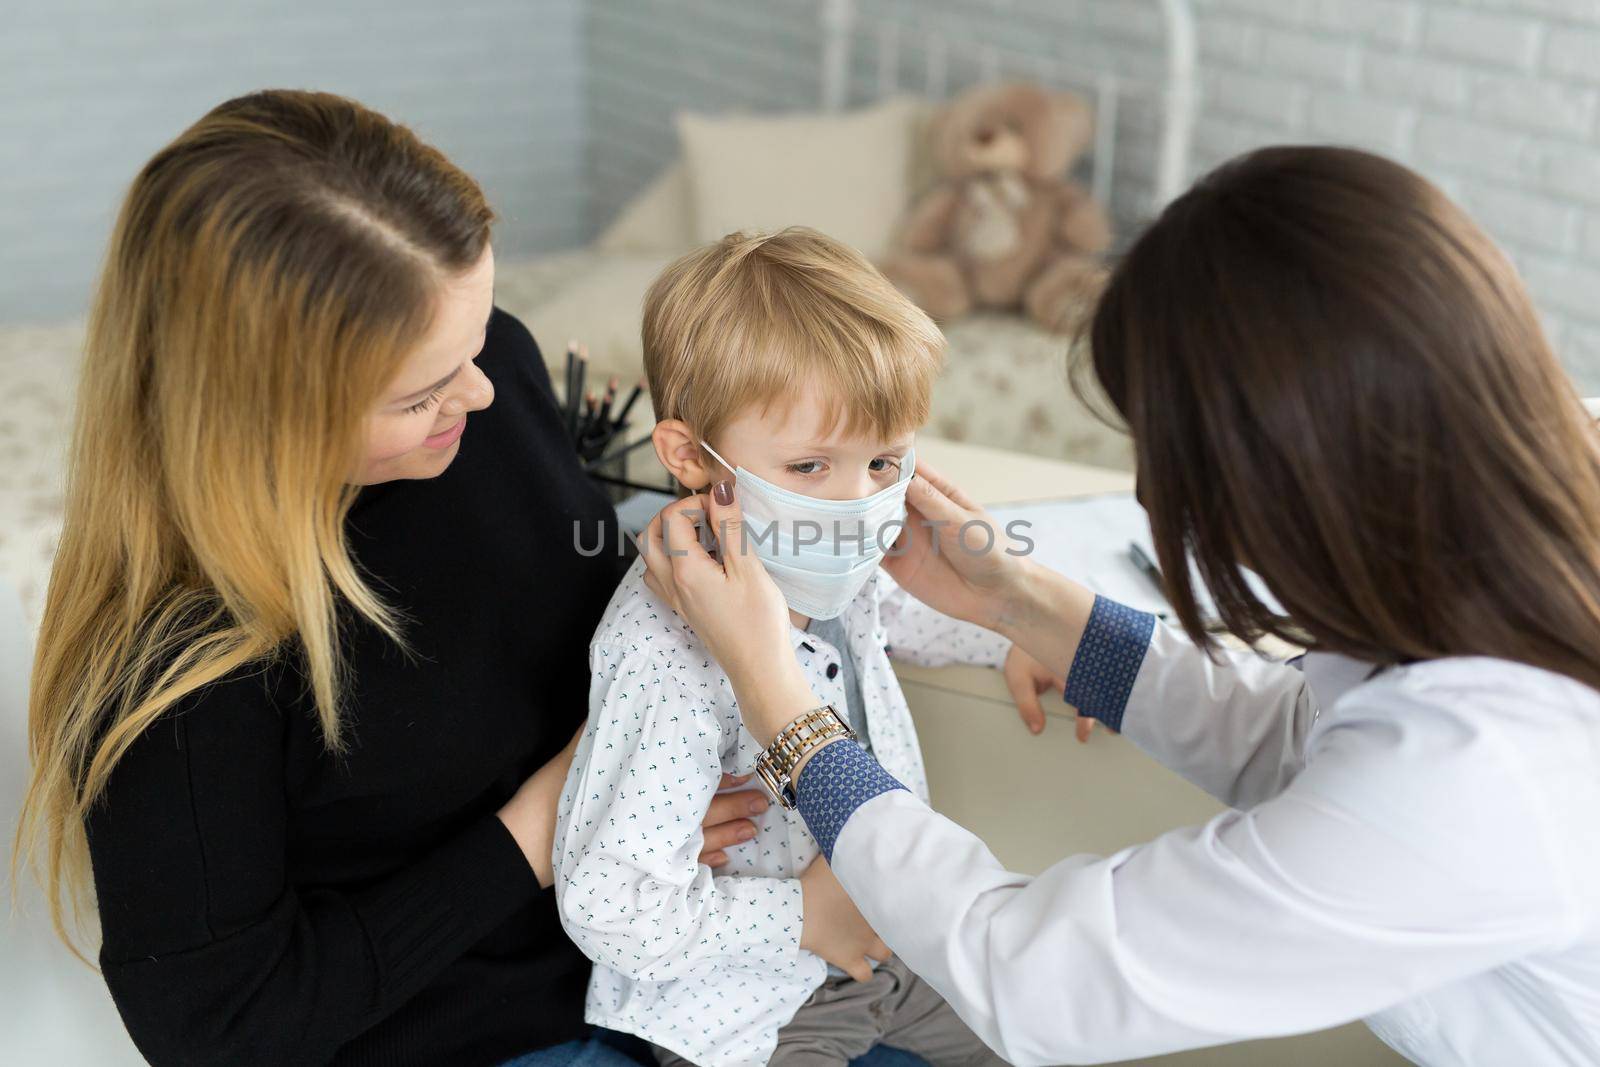 A boy in a medical mask at a doctor's appointment